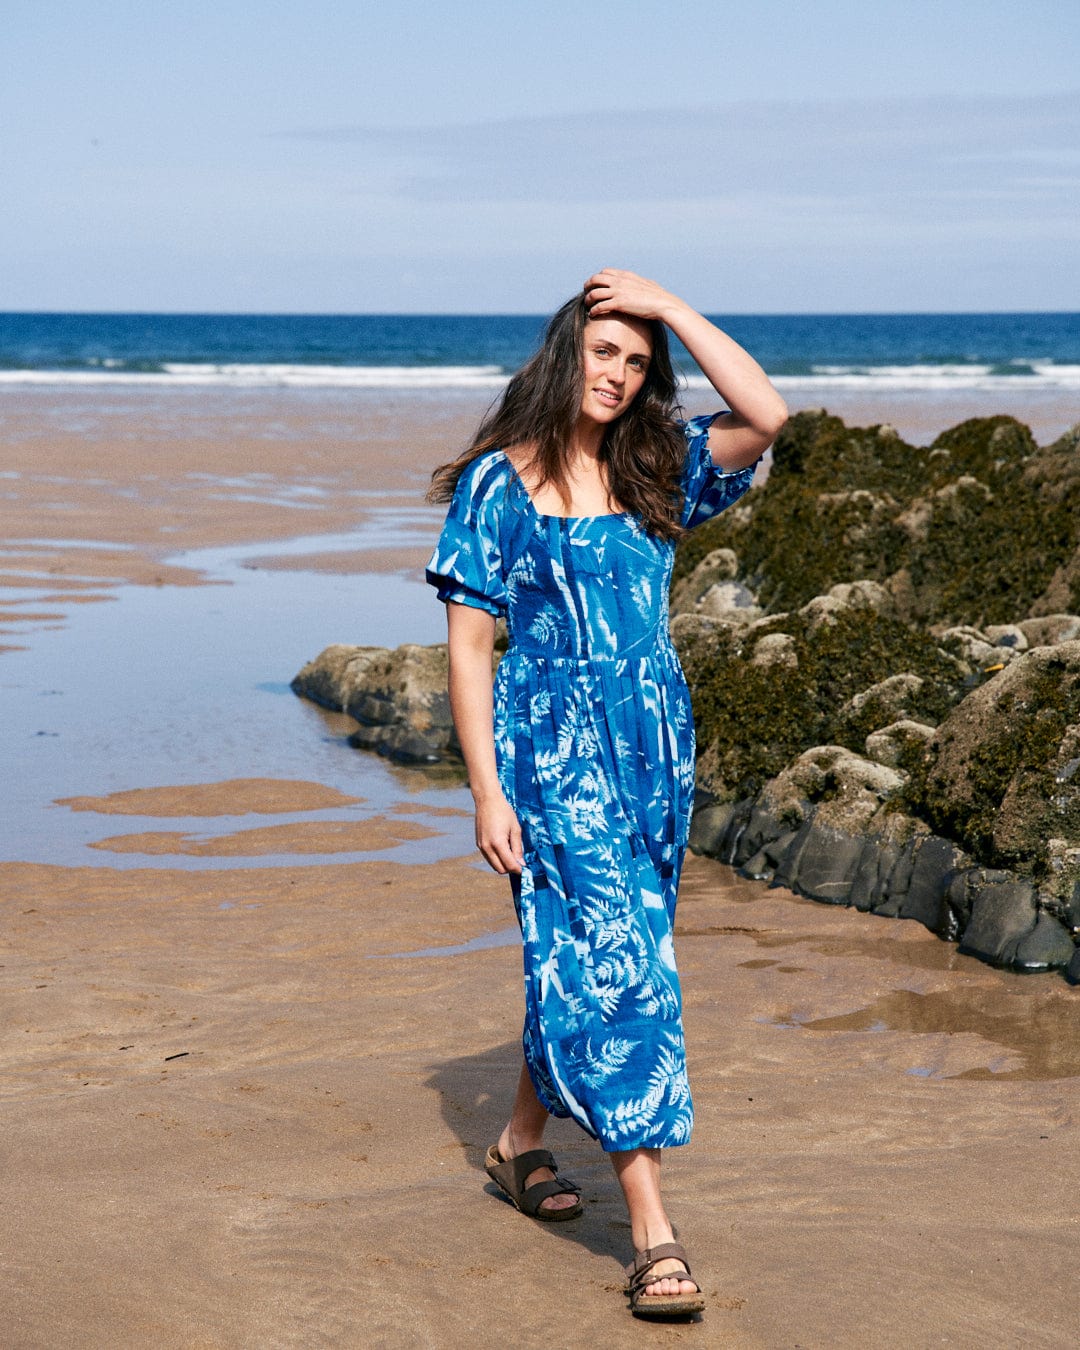 A woman in a Larran Cyanotype - Midi Woven Dress - Blue by Saltrock stands on a sandy beach near the ocean, touching her hair with one hand, with rocks visible in the background.